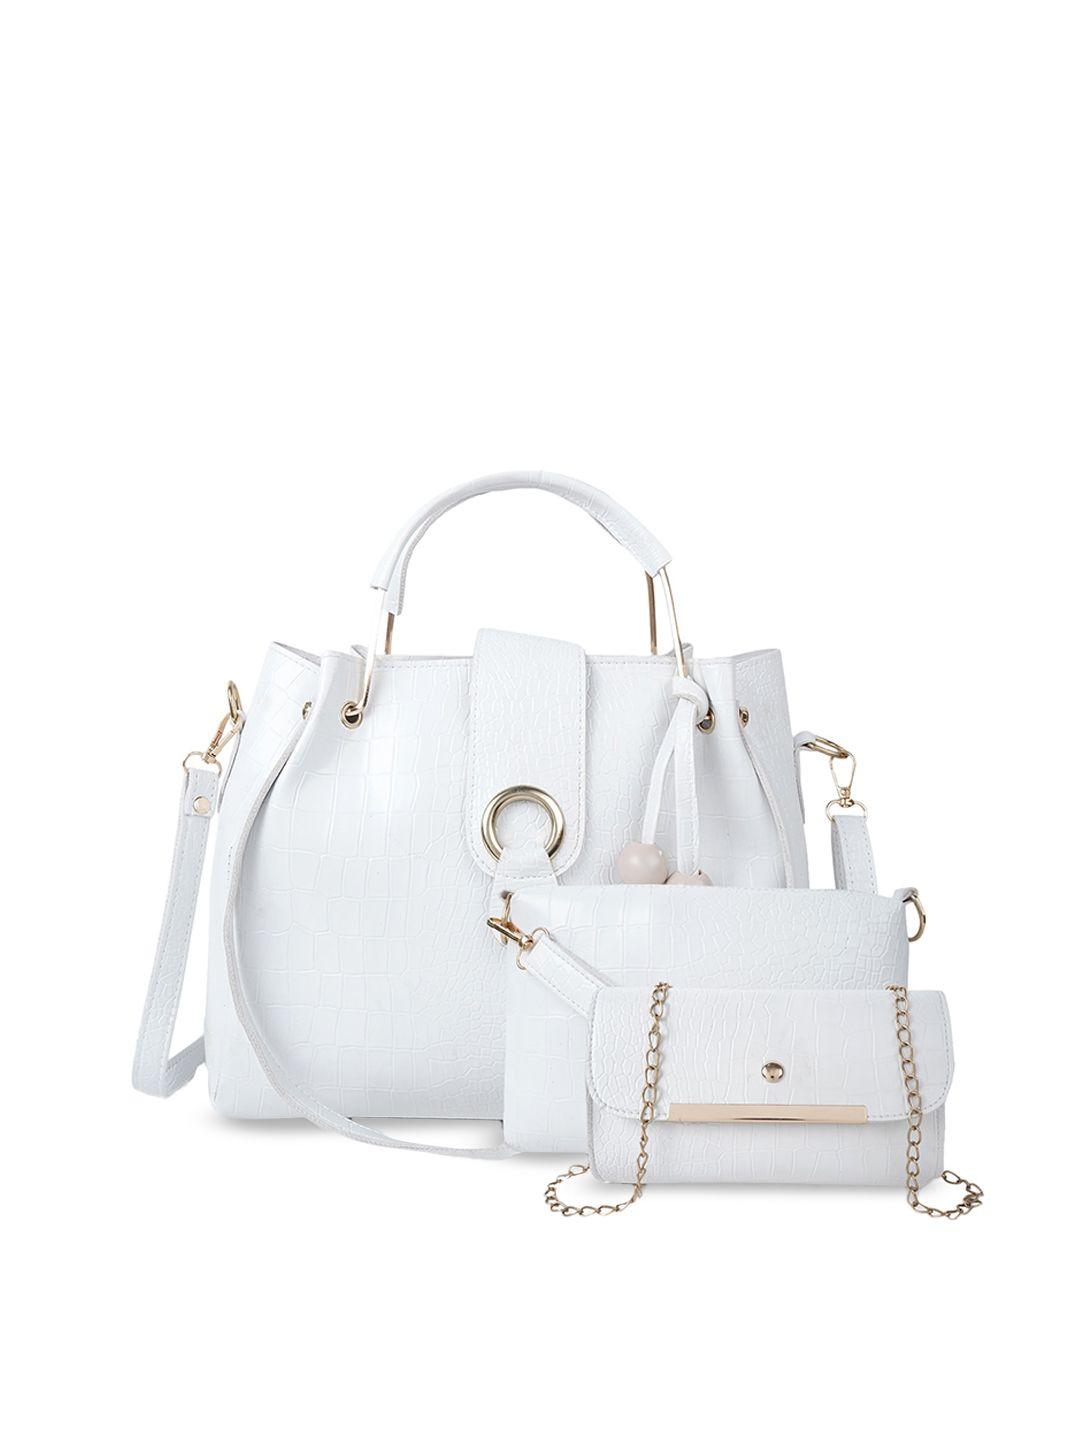 dressberry pack of 3 white & gold-toned textured structured handheld bag with tasselled